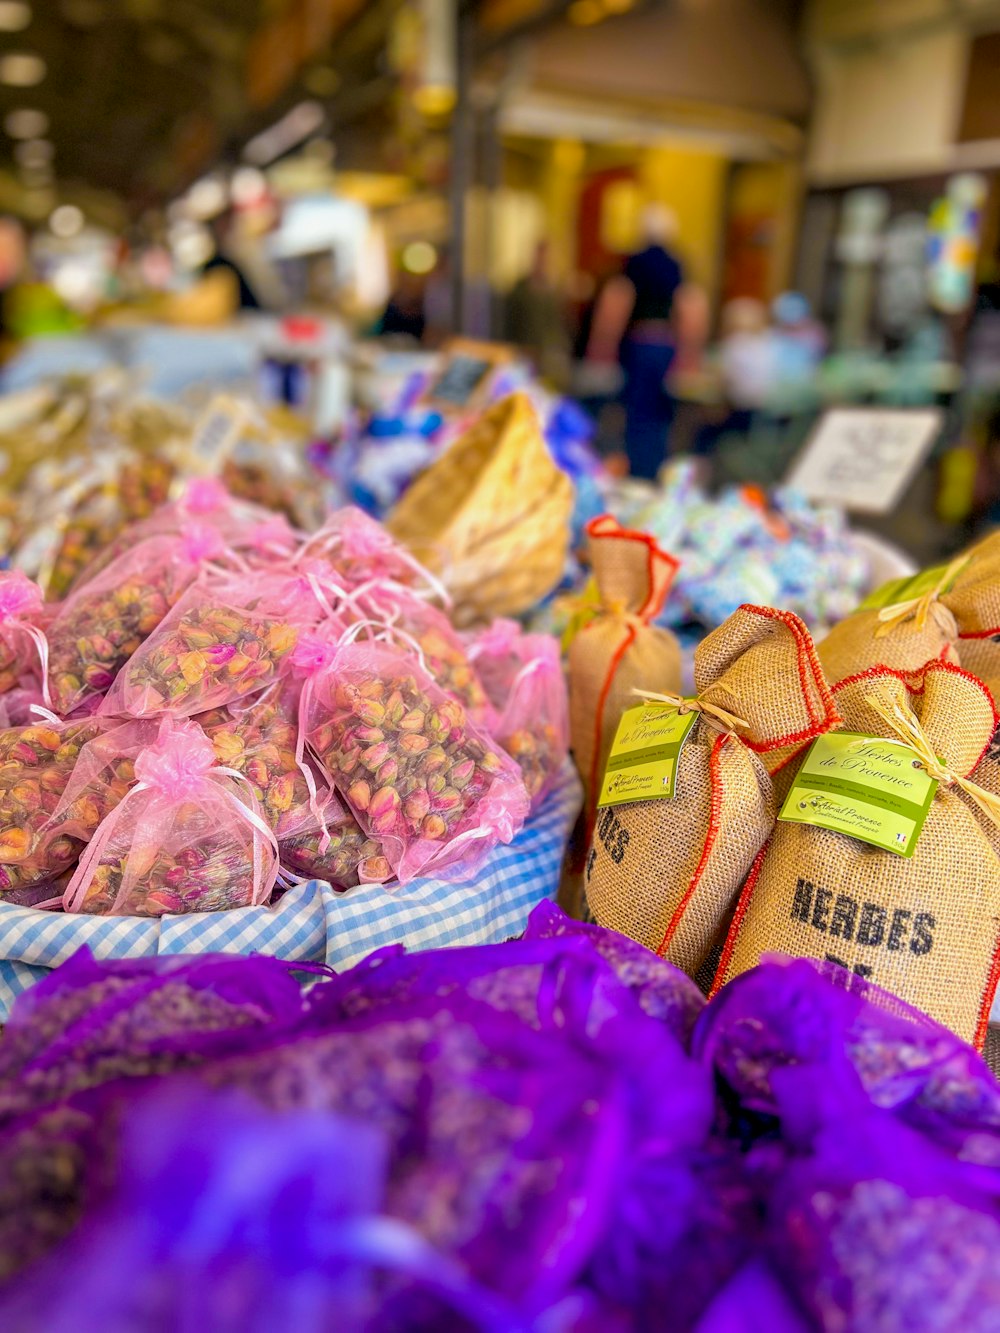 bags of nuts are on display at a market